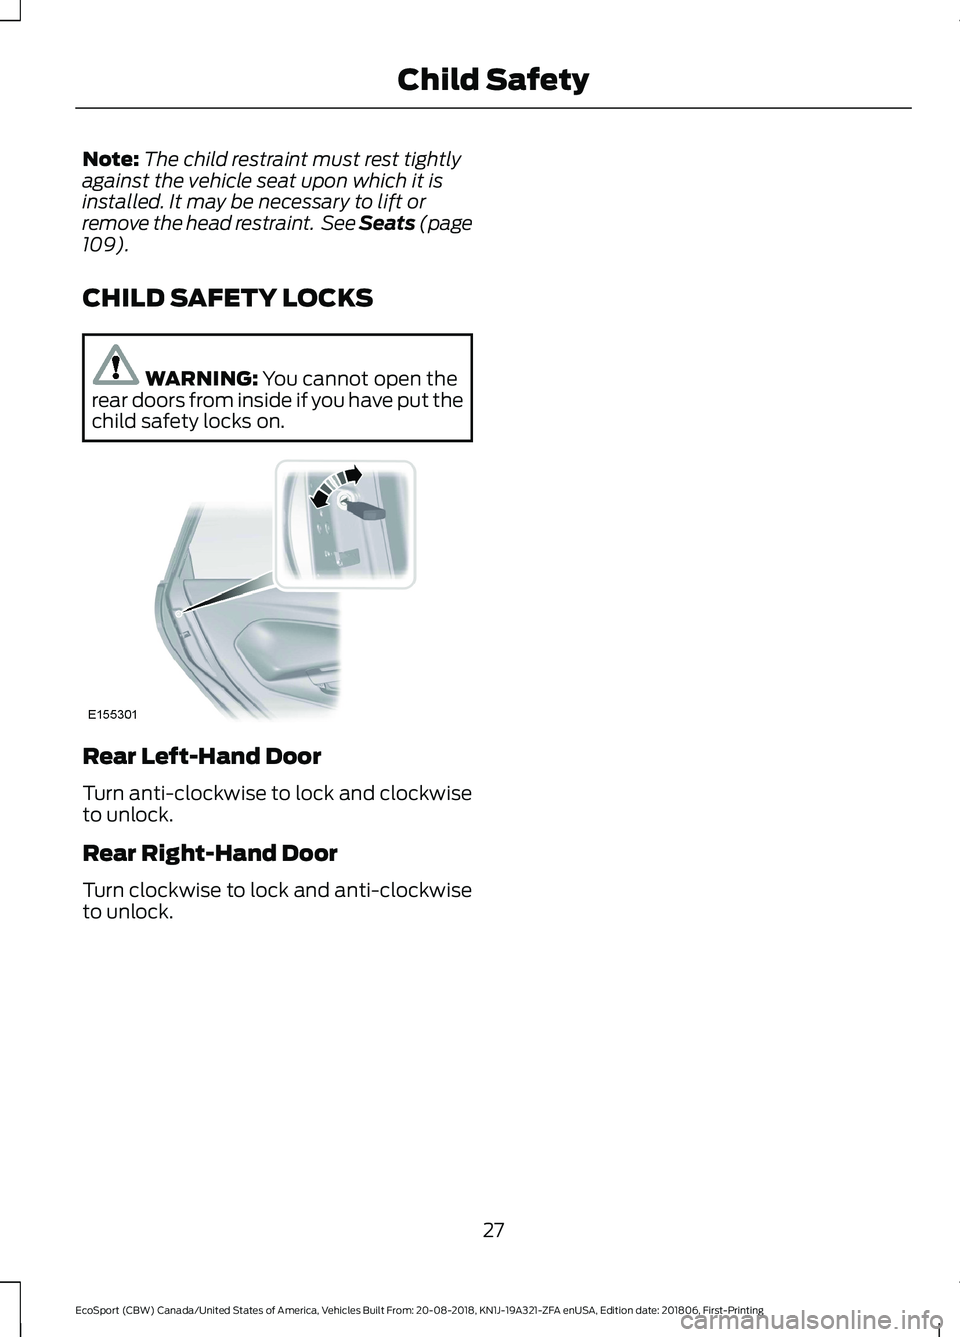 FORD ECOSPORT 2019  Owners Manual Note:The child restraint must rest tightlyagainst the vehicle seat upon which it isinstalled. It may be necessary to lift orremove the head restraint. See Seats (page109).
CHILD SAFETY LOCKS
WARNING: 